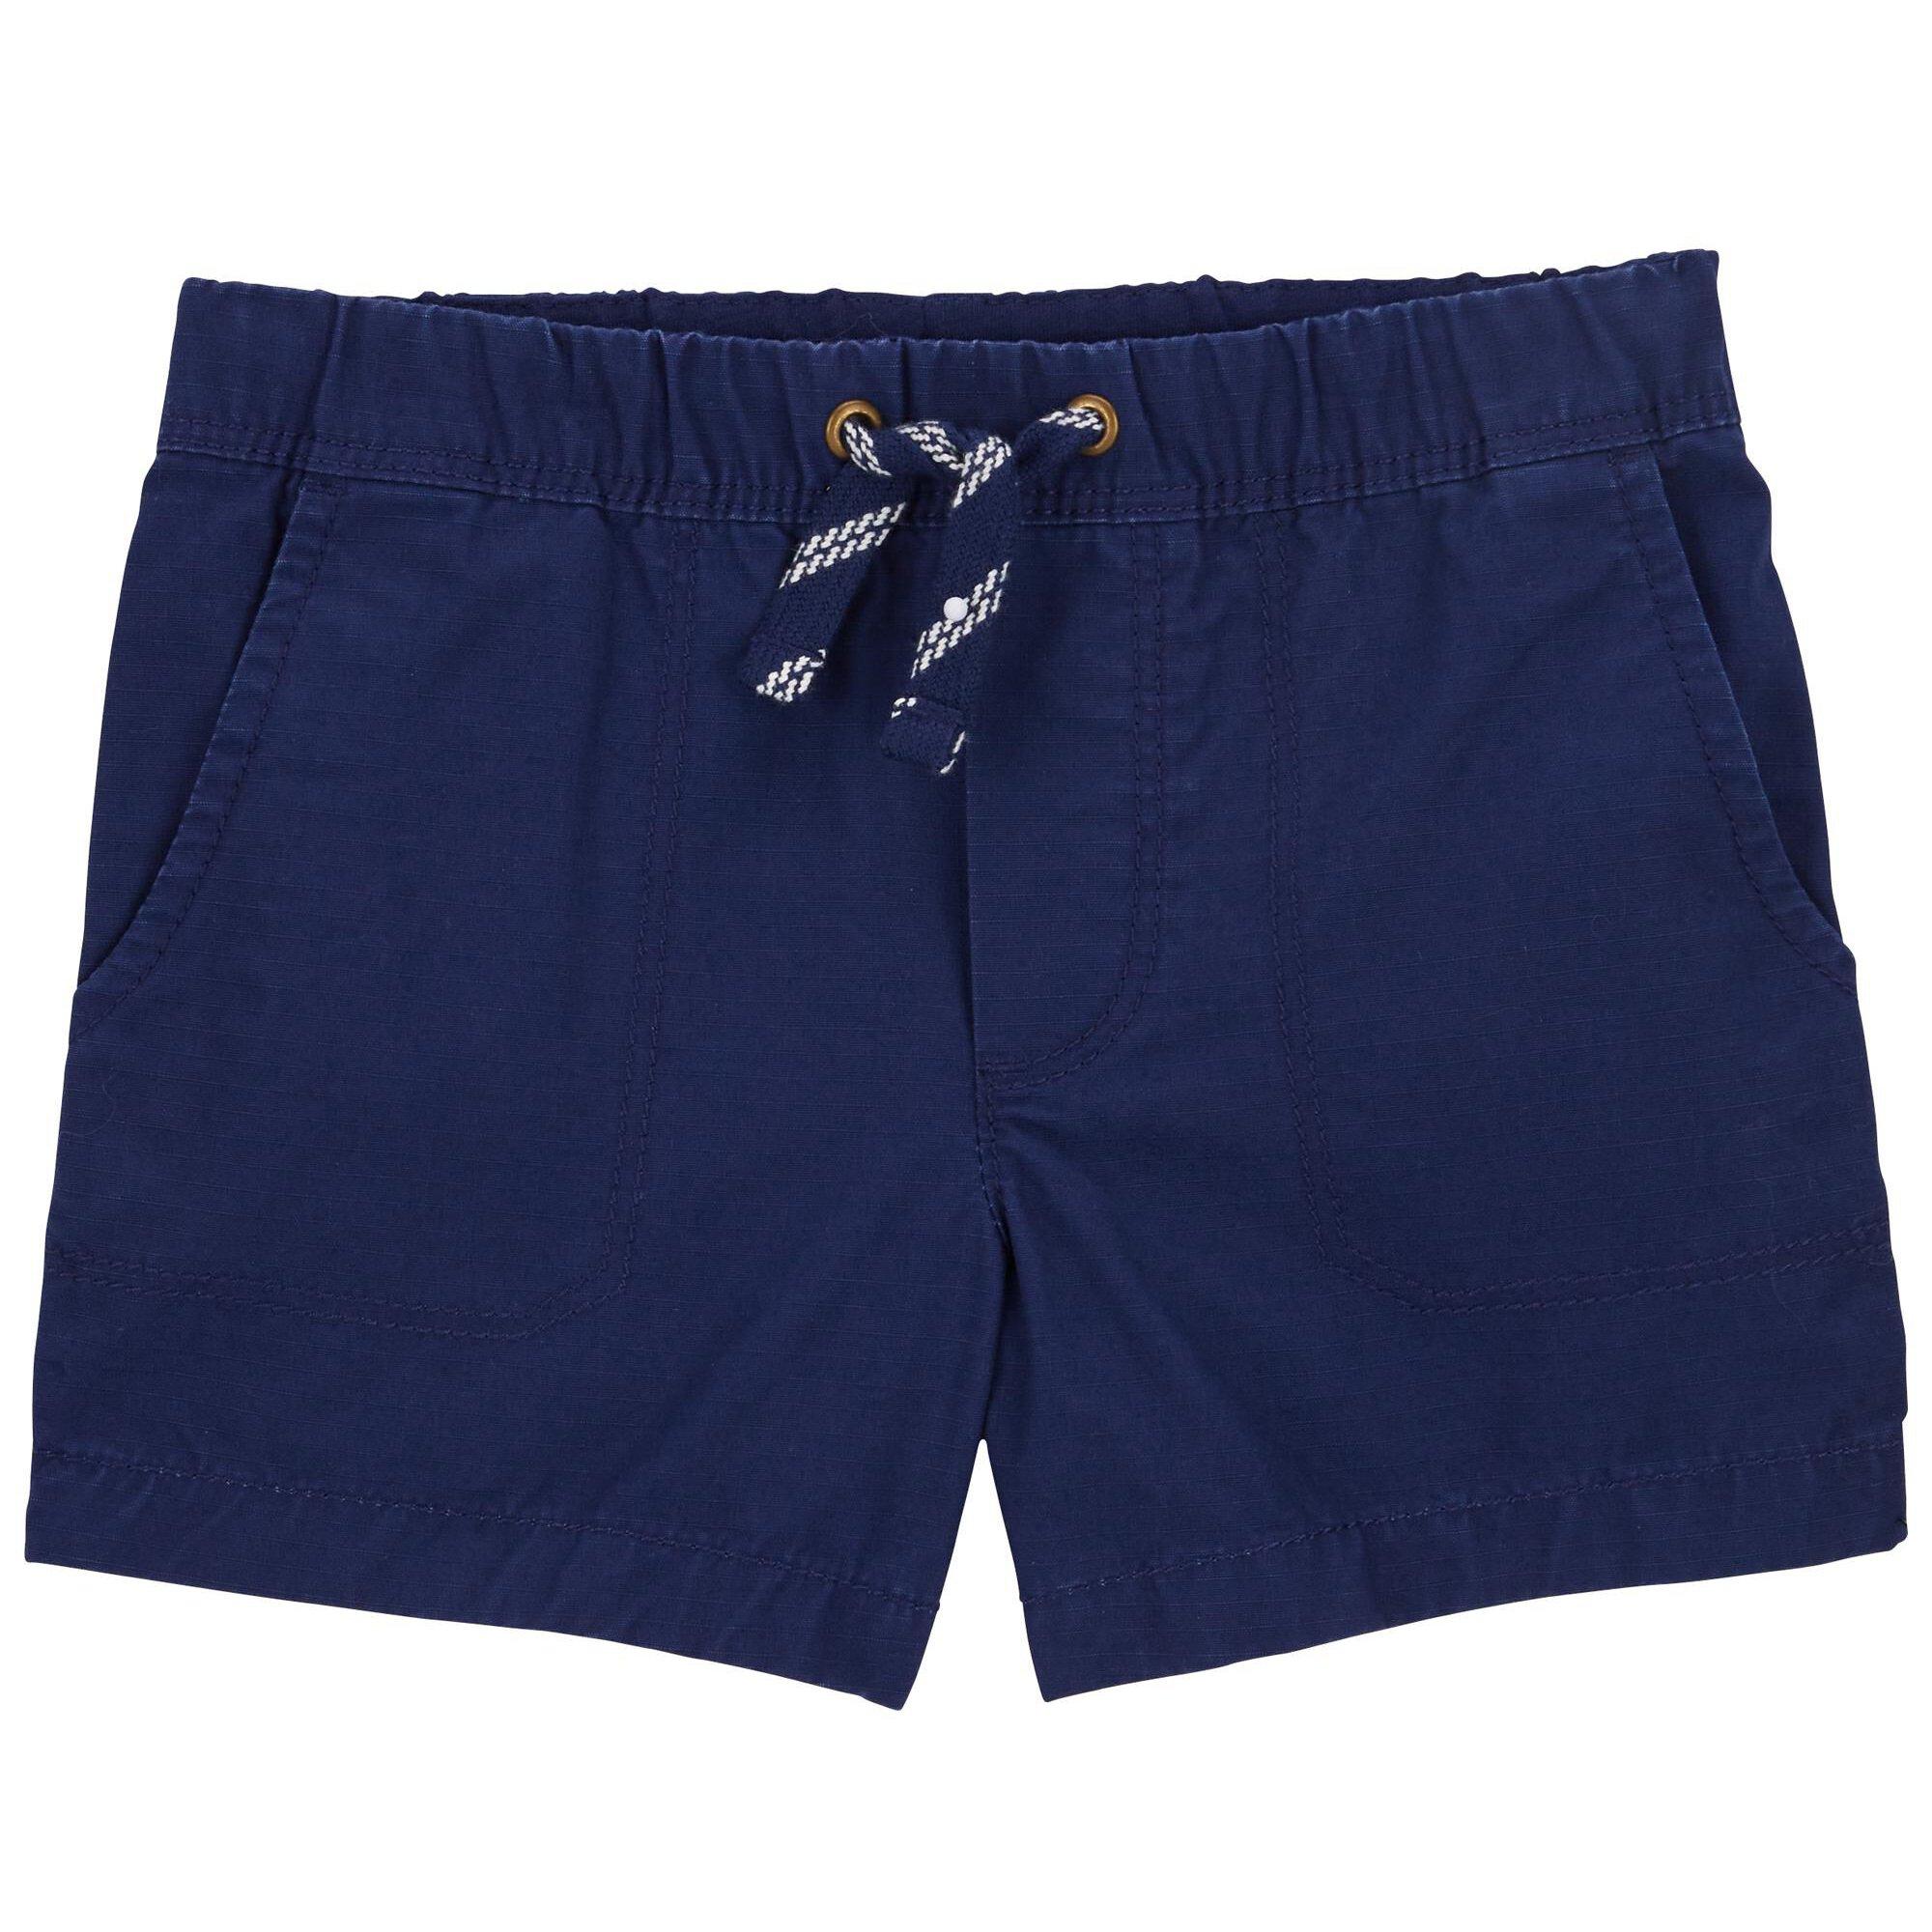 Carters Toddler Boys Solid Pull-On Terrain Shorts